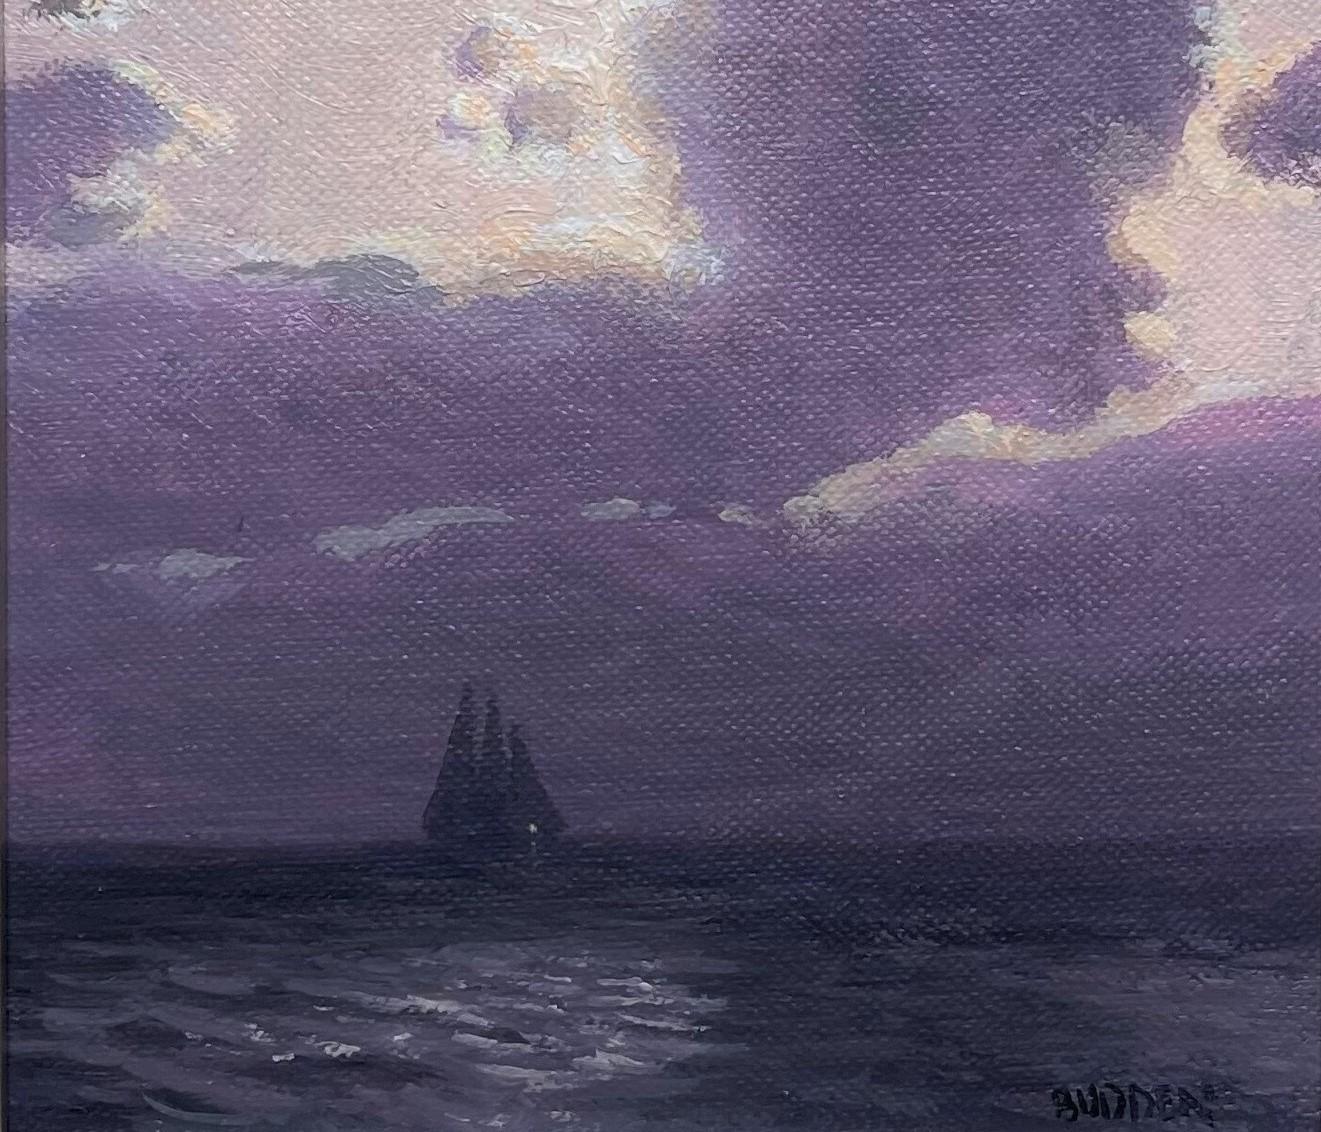 Impressionistic Seascape Nocturne Painting Michael Budden Moonlight Sailing  For Sale 3